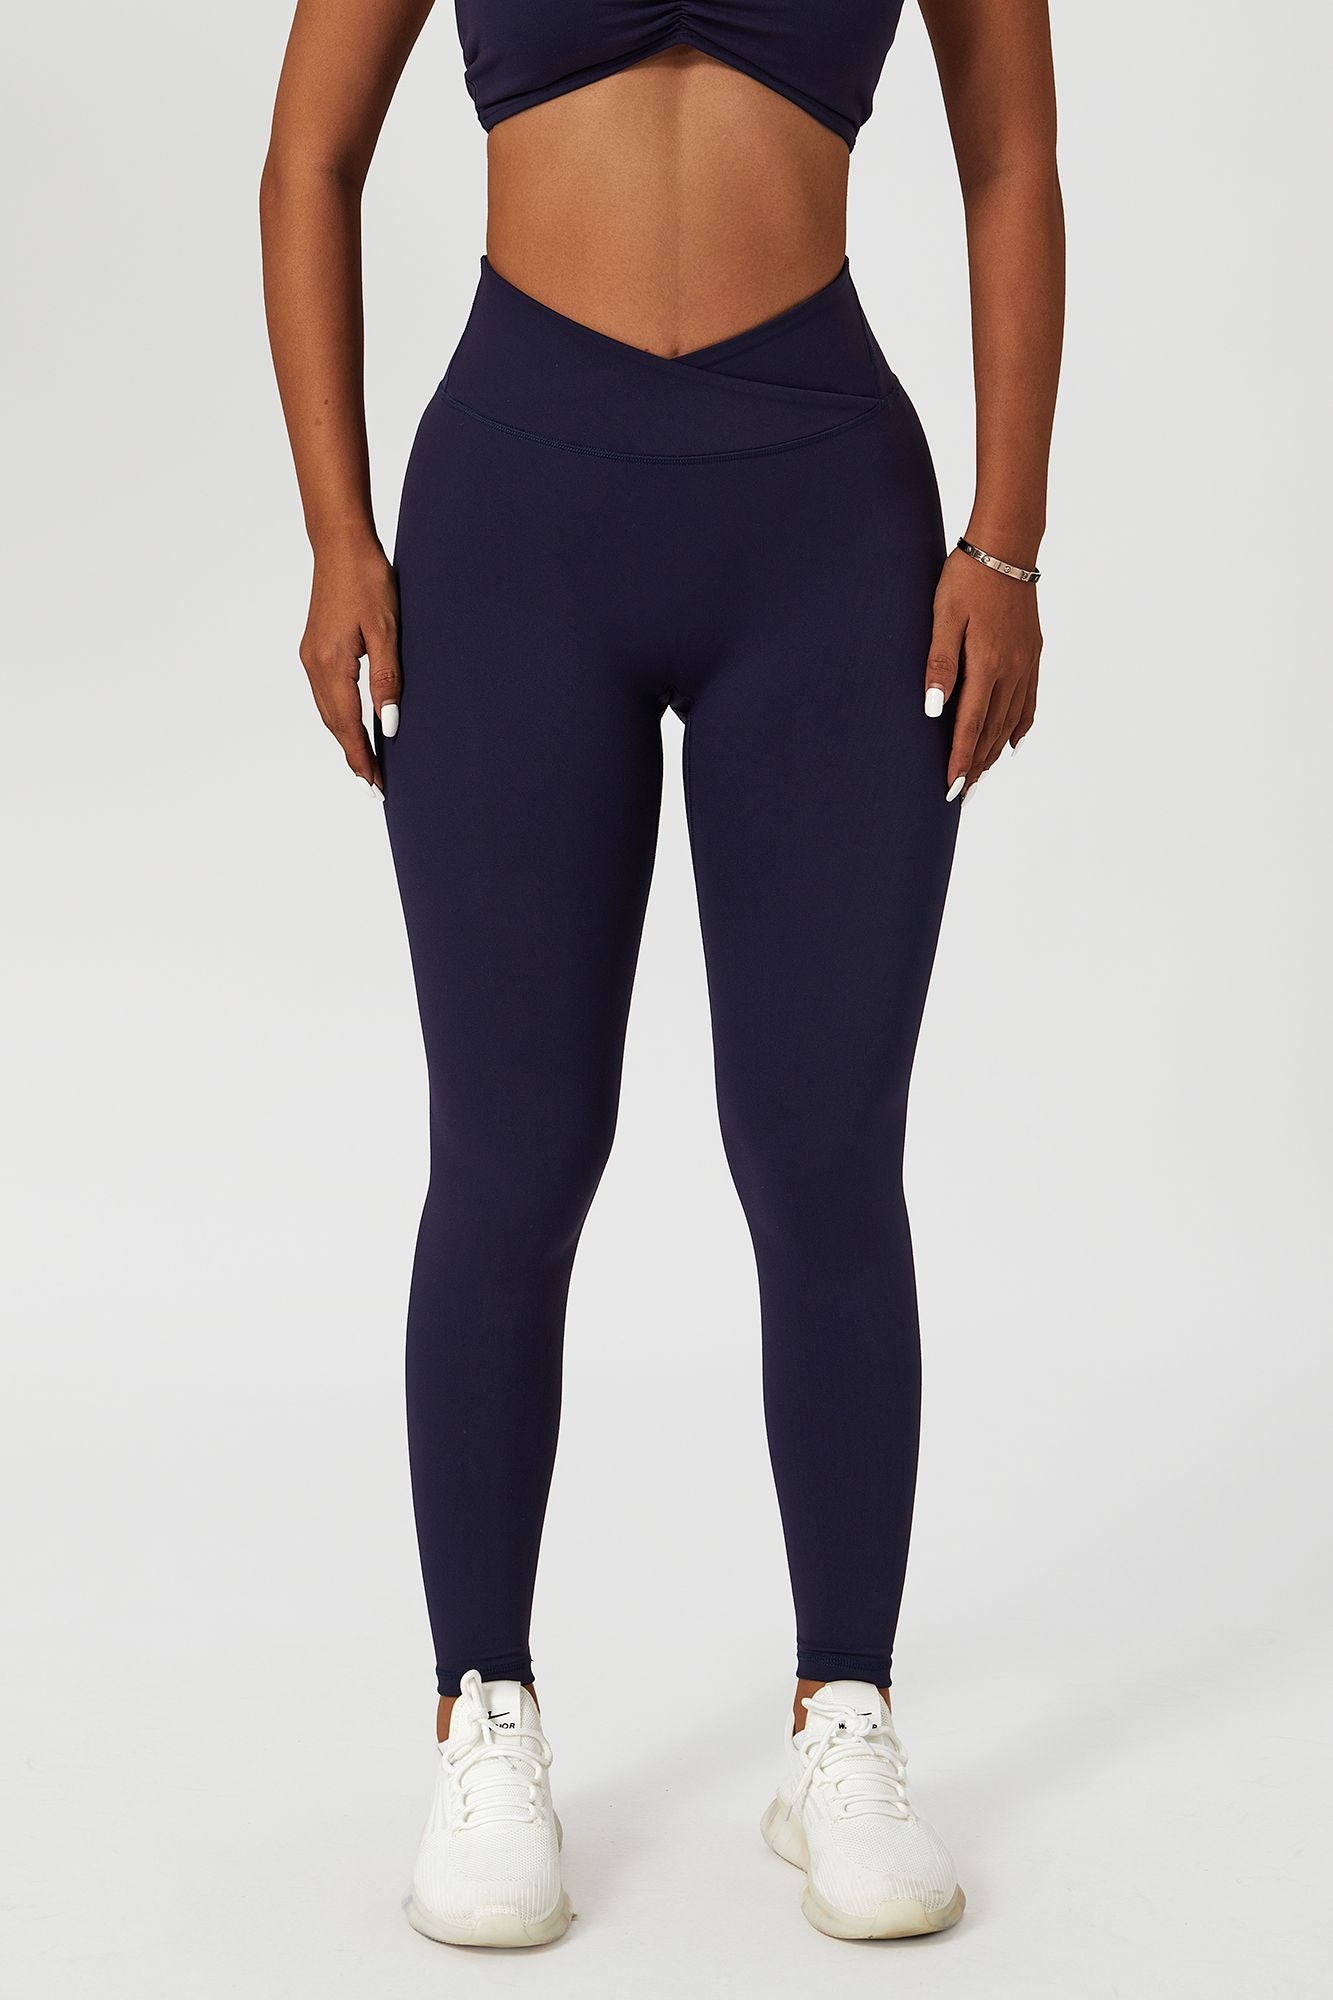 Elevate Your Style with JC London's Front Seam Leggings